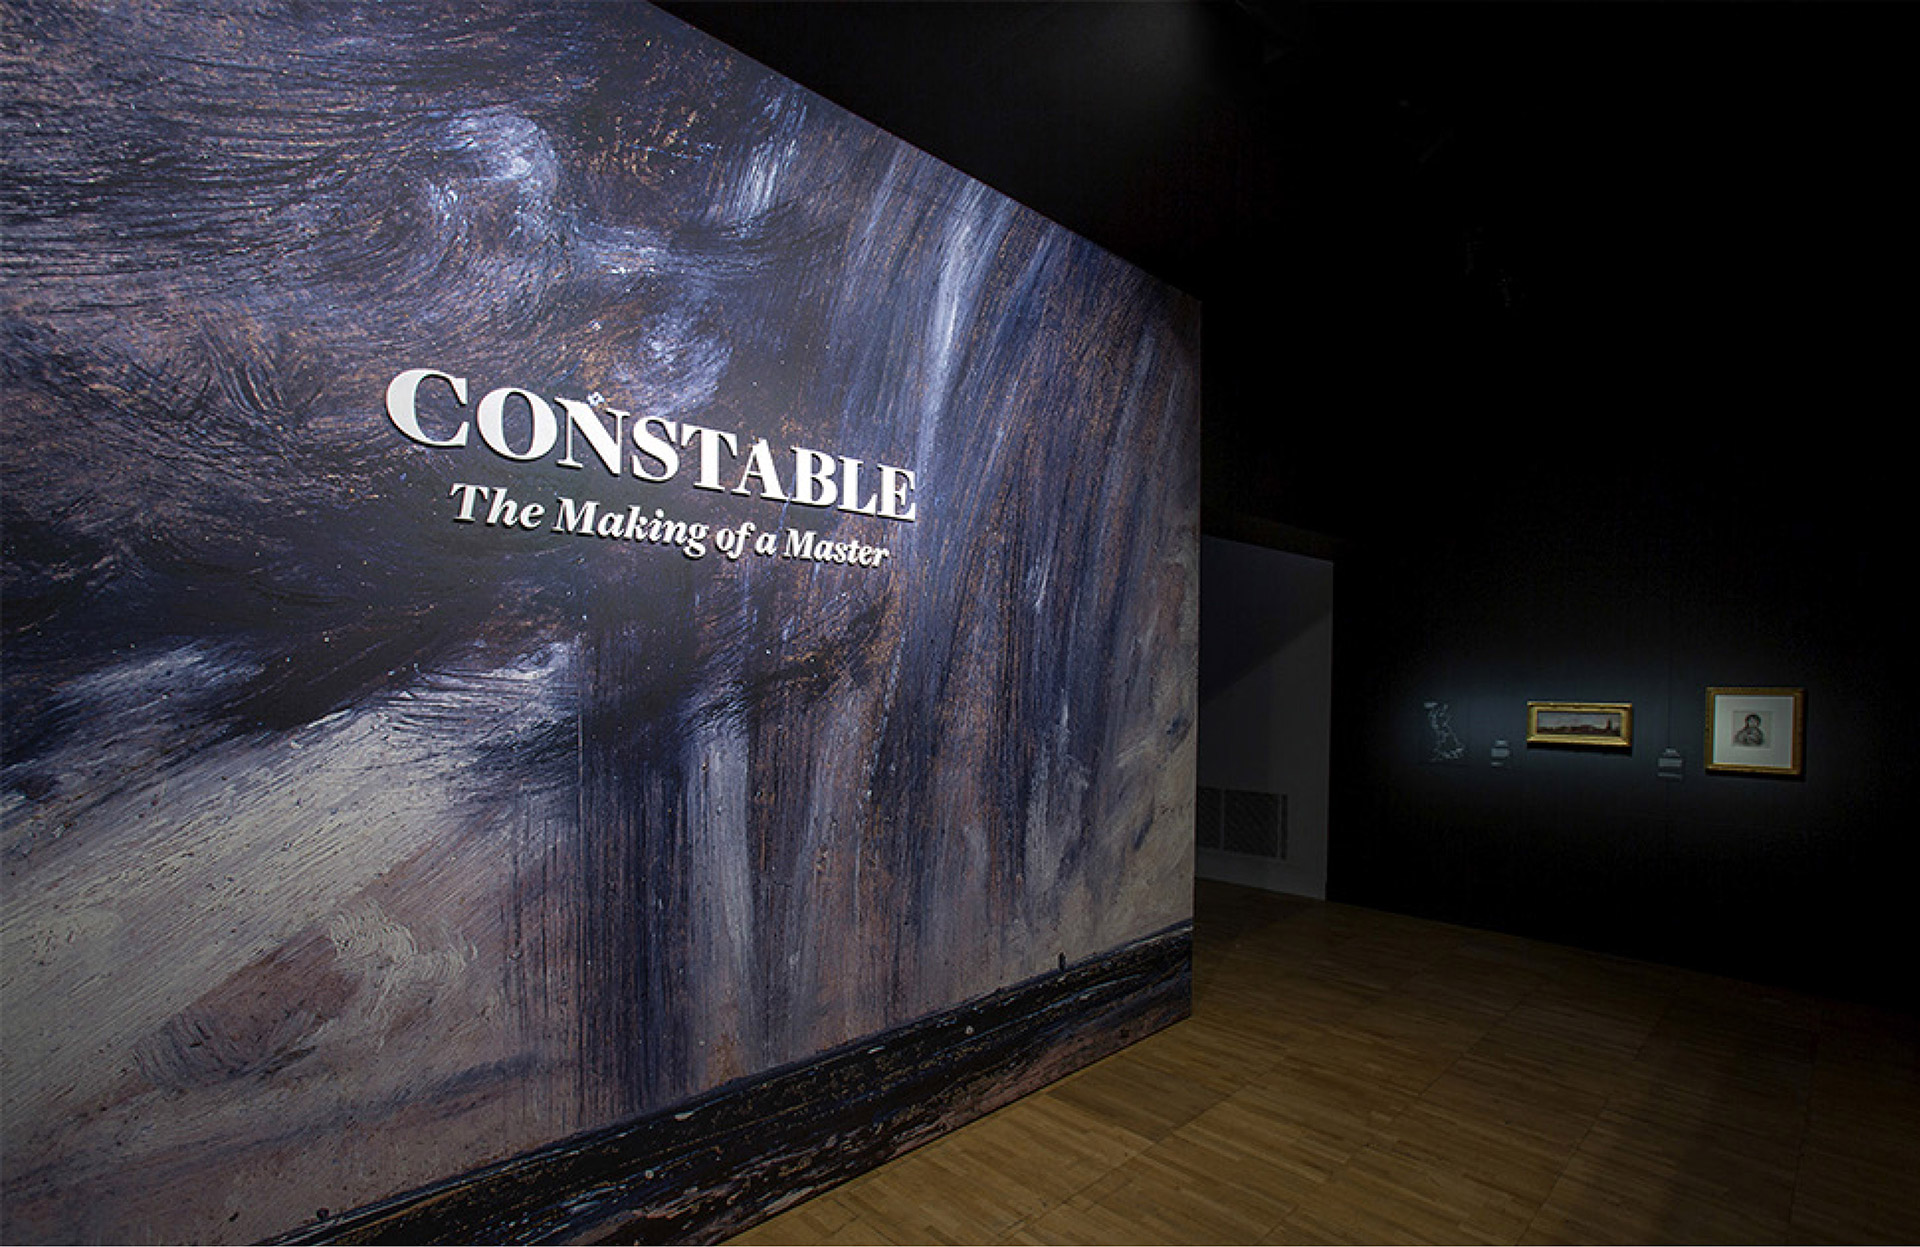 Constable: The Making of a Master at V&A South Kensington designed by Irish Butcher